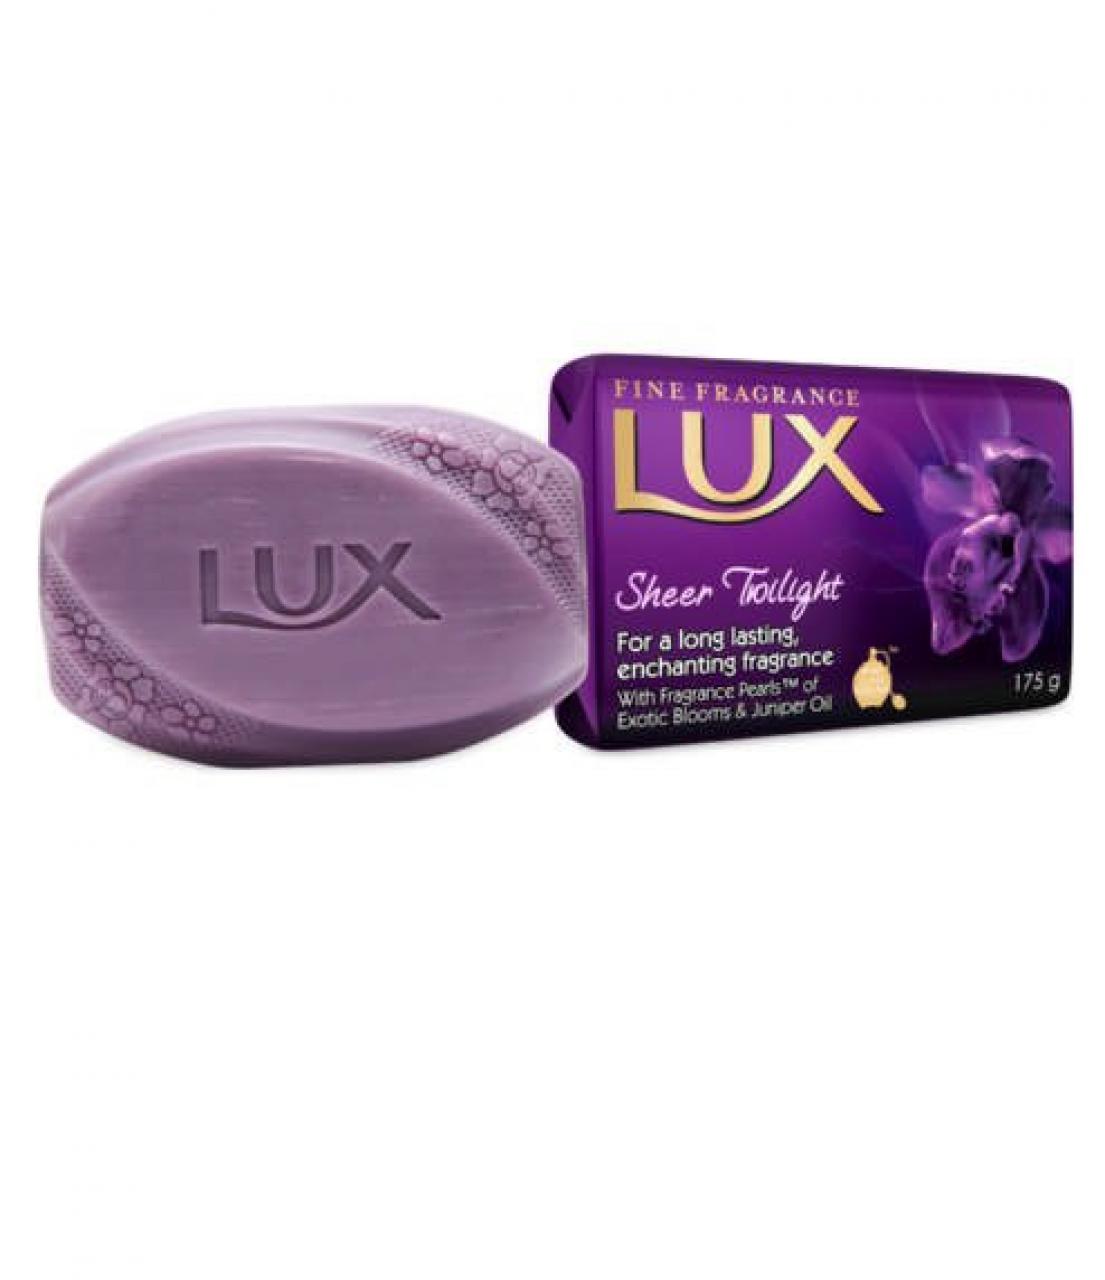 Soap lux magical spell